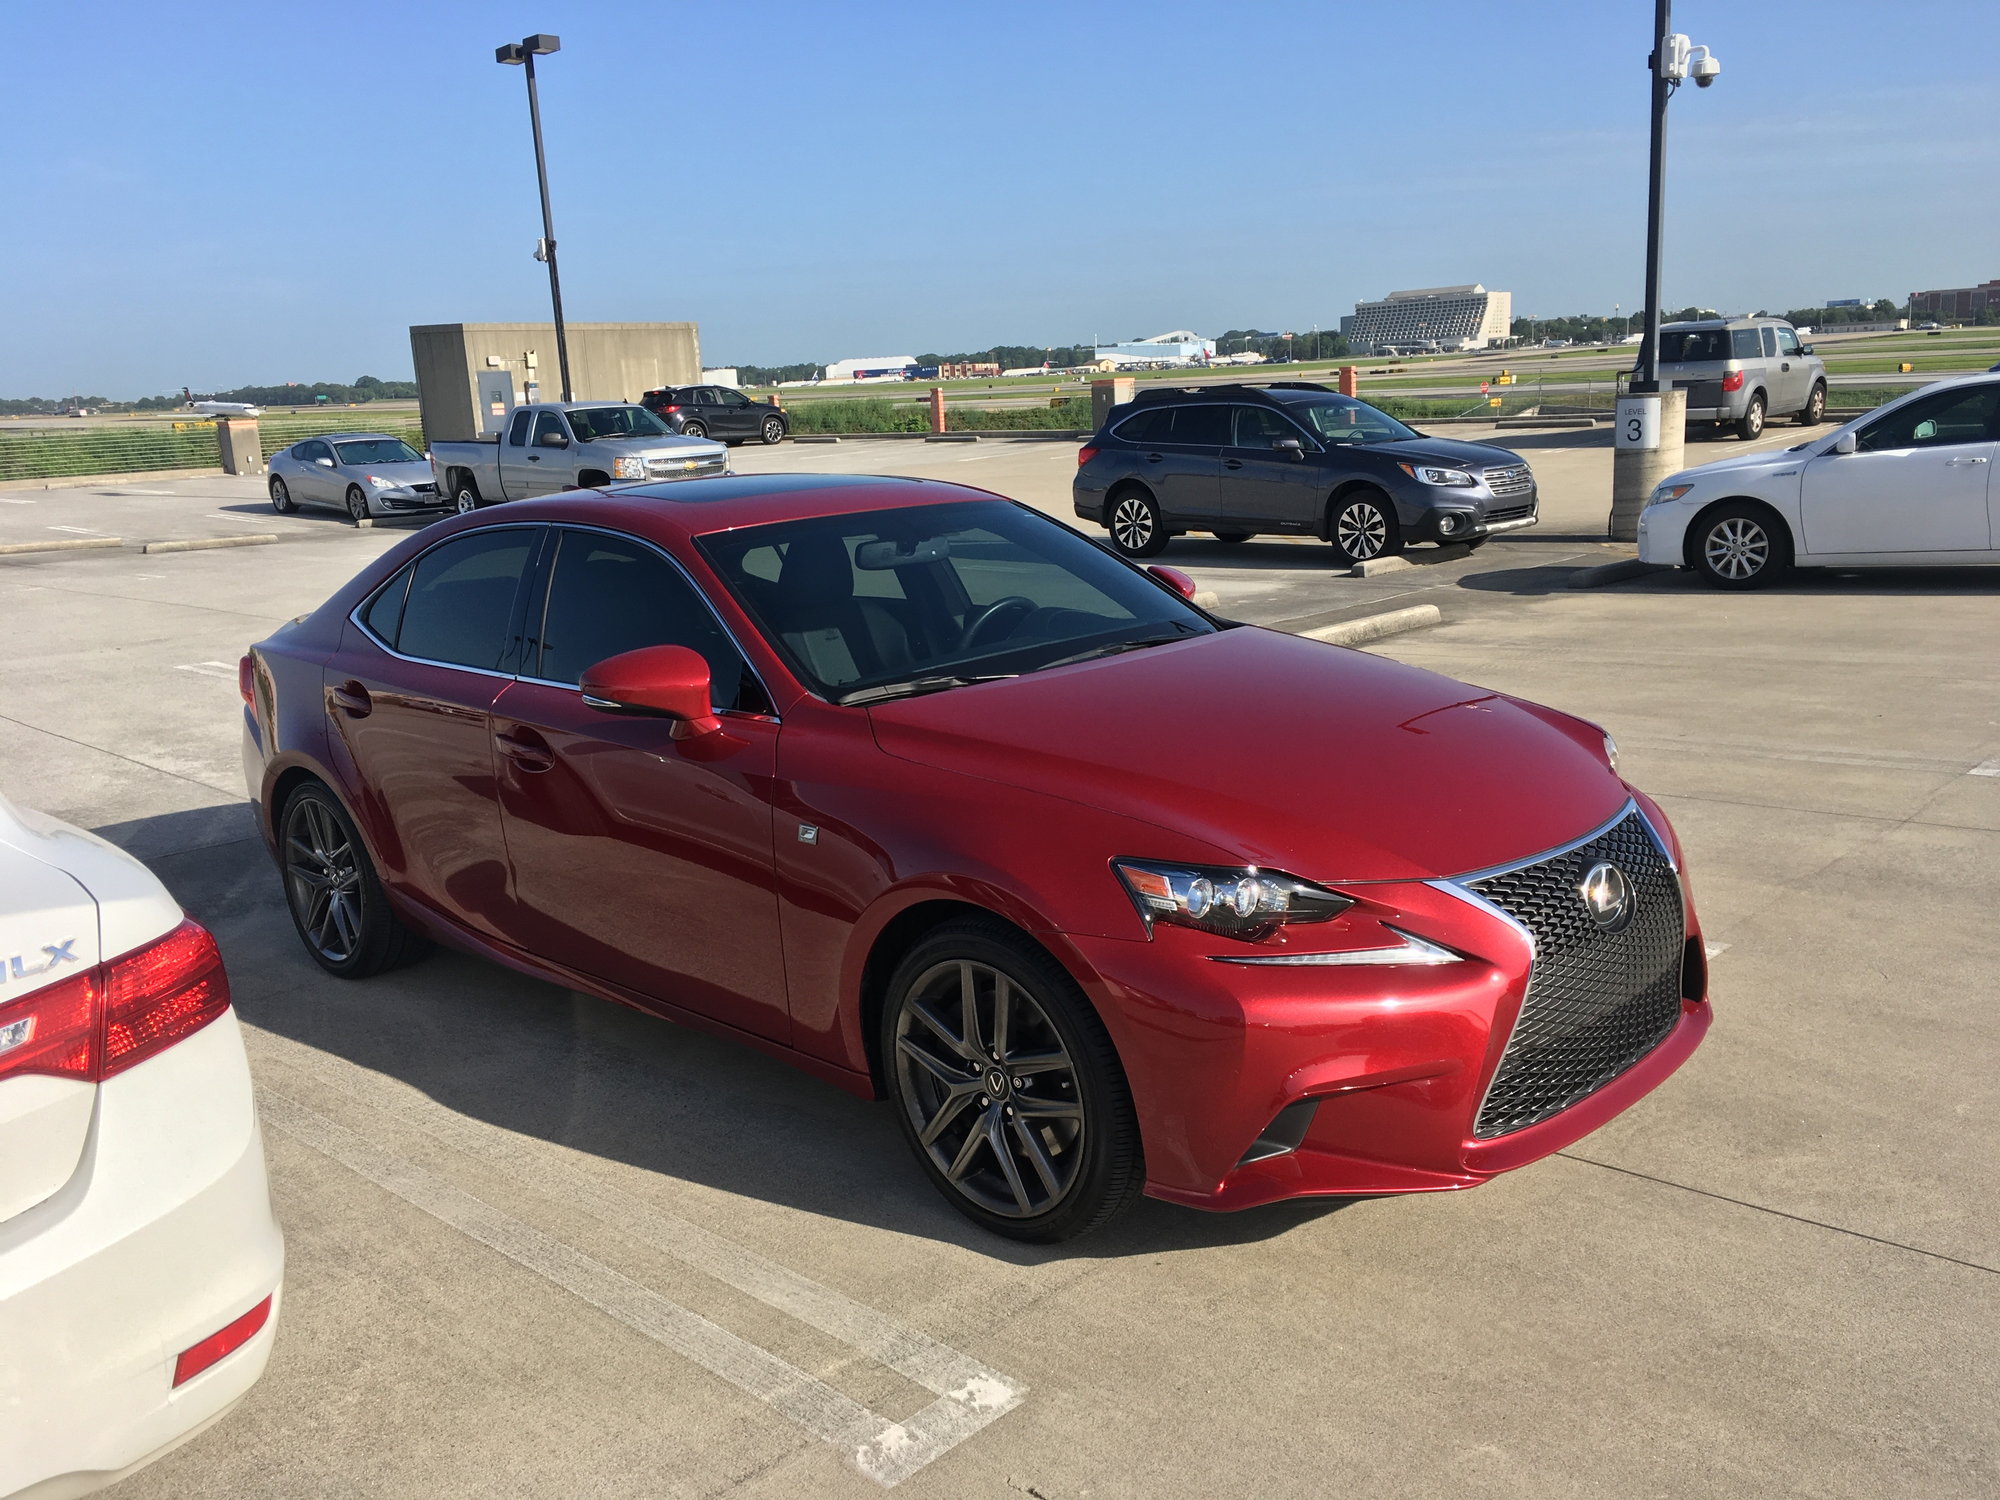 2014 Lexus IS350 - 2014 IS 350 F Sport Matador Red Mica RWD - Used - VIN JTHBE1D29E5012216 - 45,800 Miles - 6 cyl - 2WD - Automatic - Sedan - Red - Atlanta, GA 30312, United States